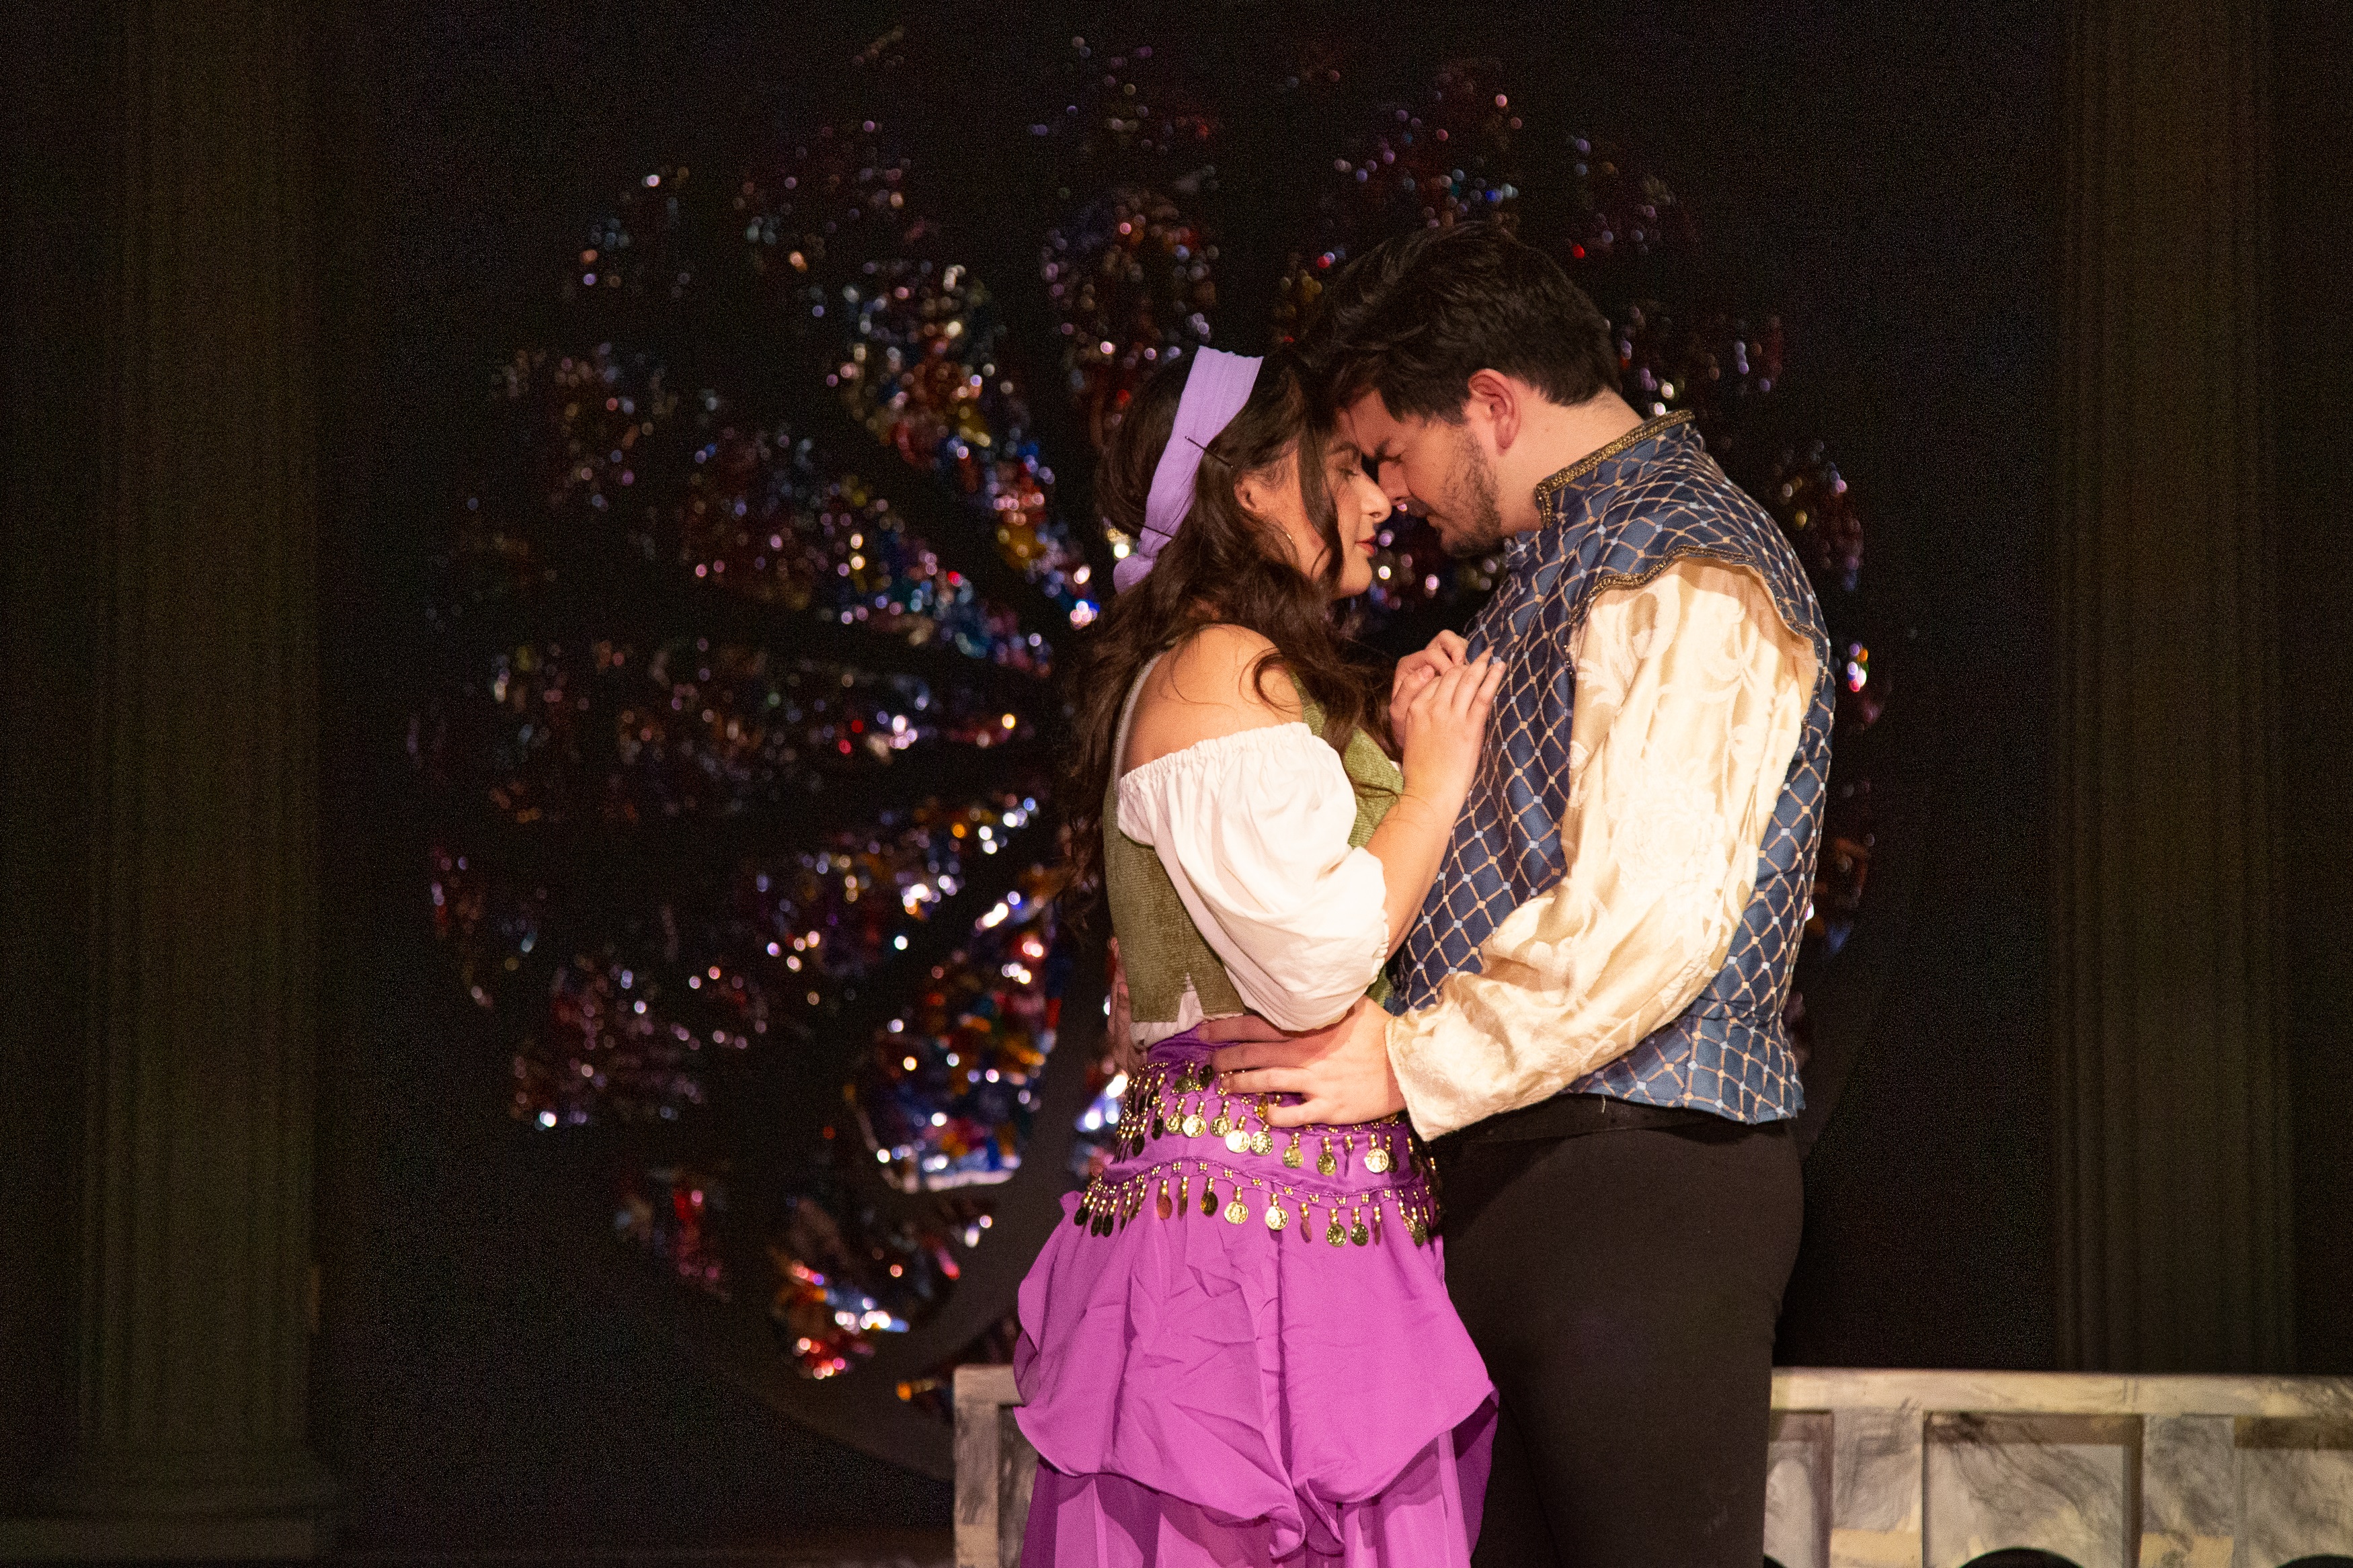 Captain Phoebus de Martin (Tristan Ferrara) swears to protect Esmeralda (Rhiannon Karp) from all who would try to hurt her ever again. Photo Credit: Meredyth Hope Photography